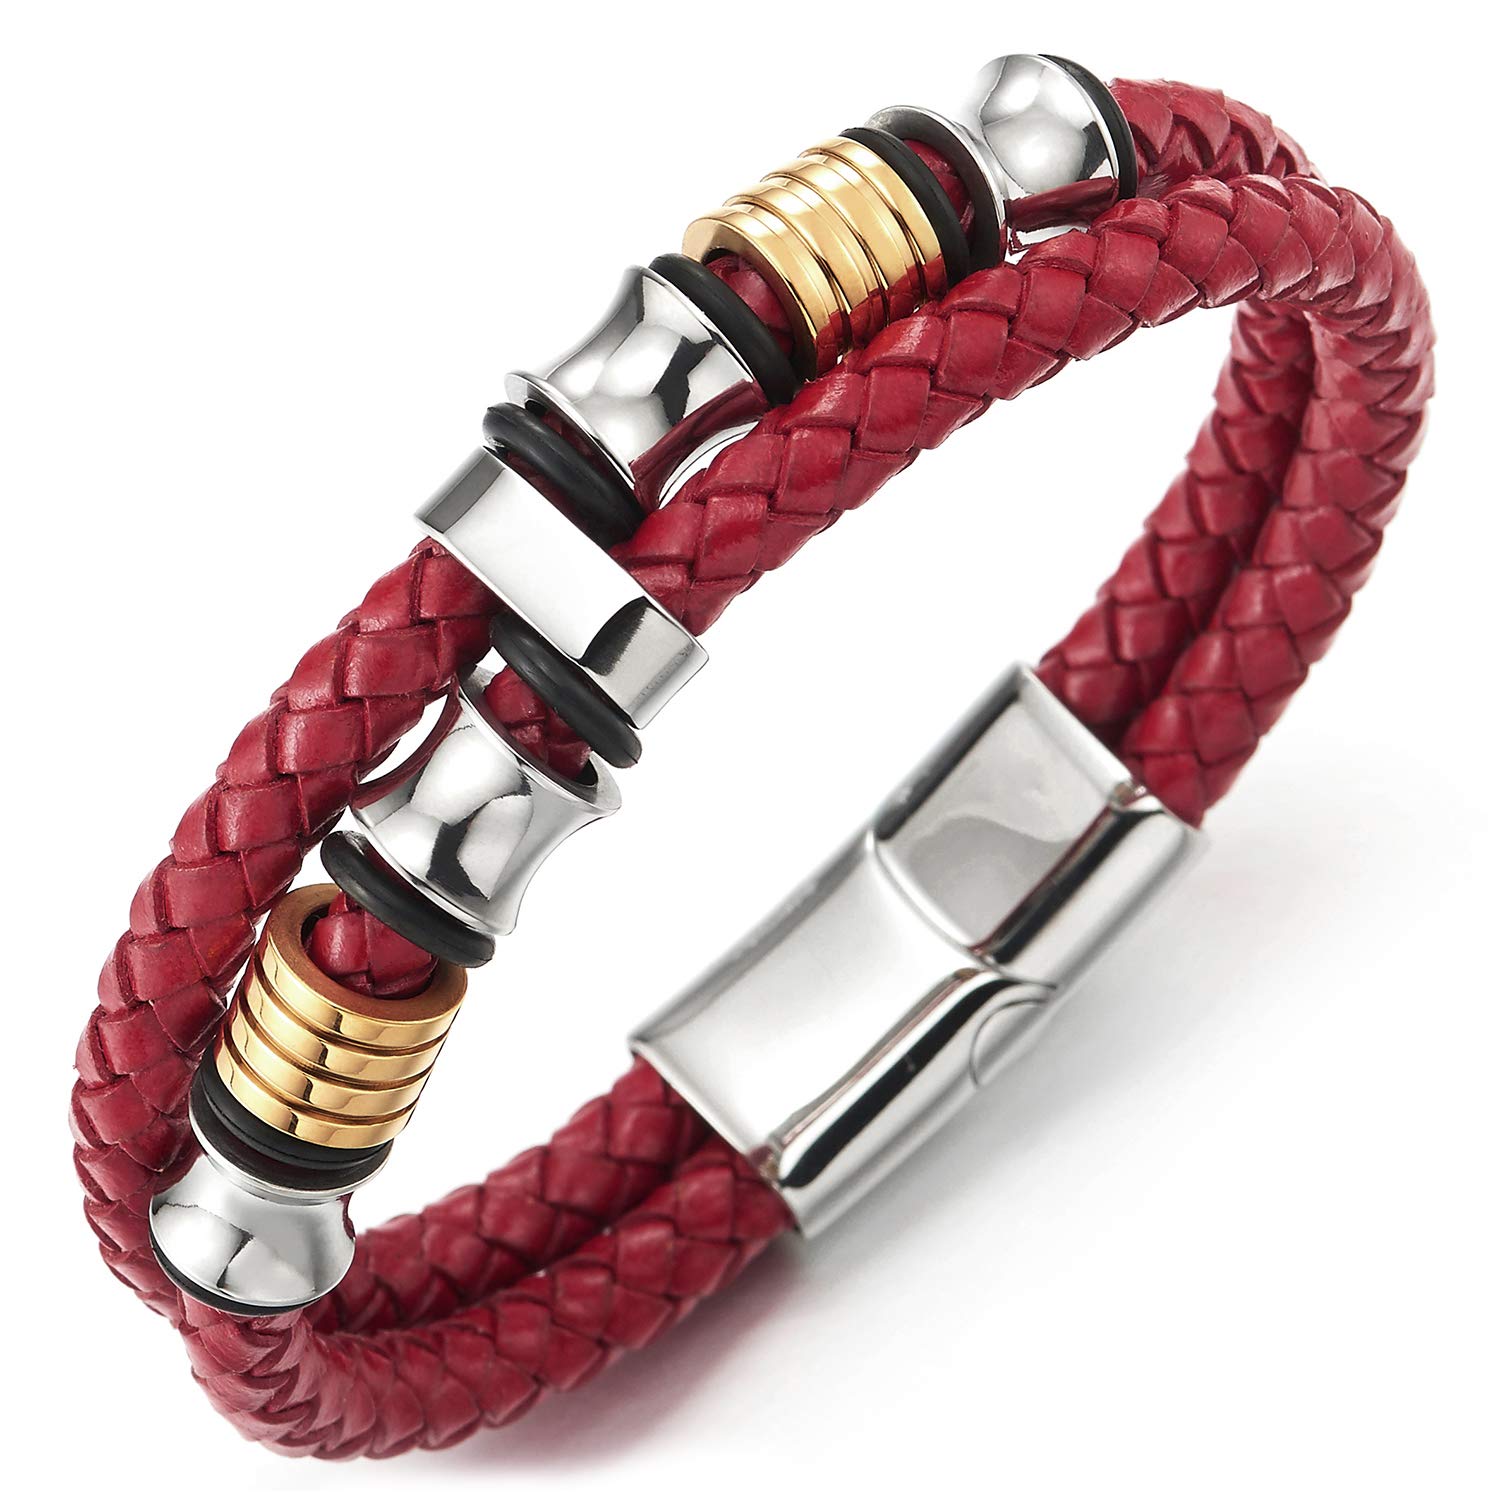 Bracelet Steel 3 rings closing and Red leather - Luxury Bracelets